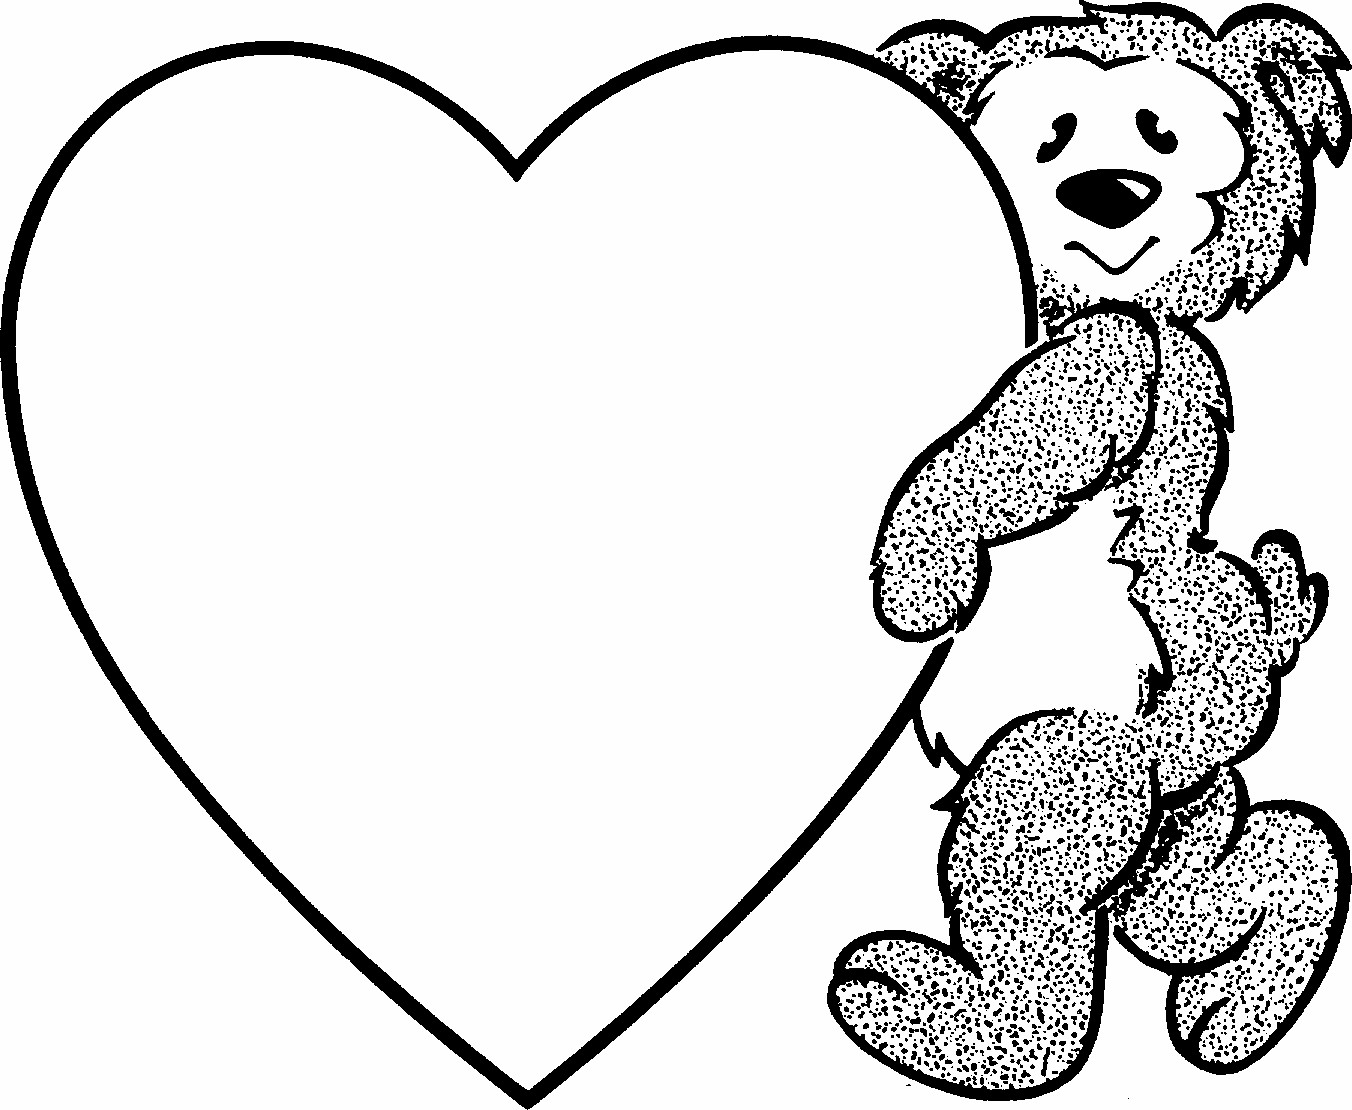 Free Printable Heart Coloring Pages
 Coloring Pages Hearts Free Printable Coloring Pages for